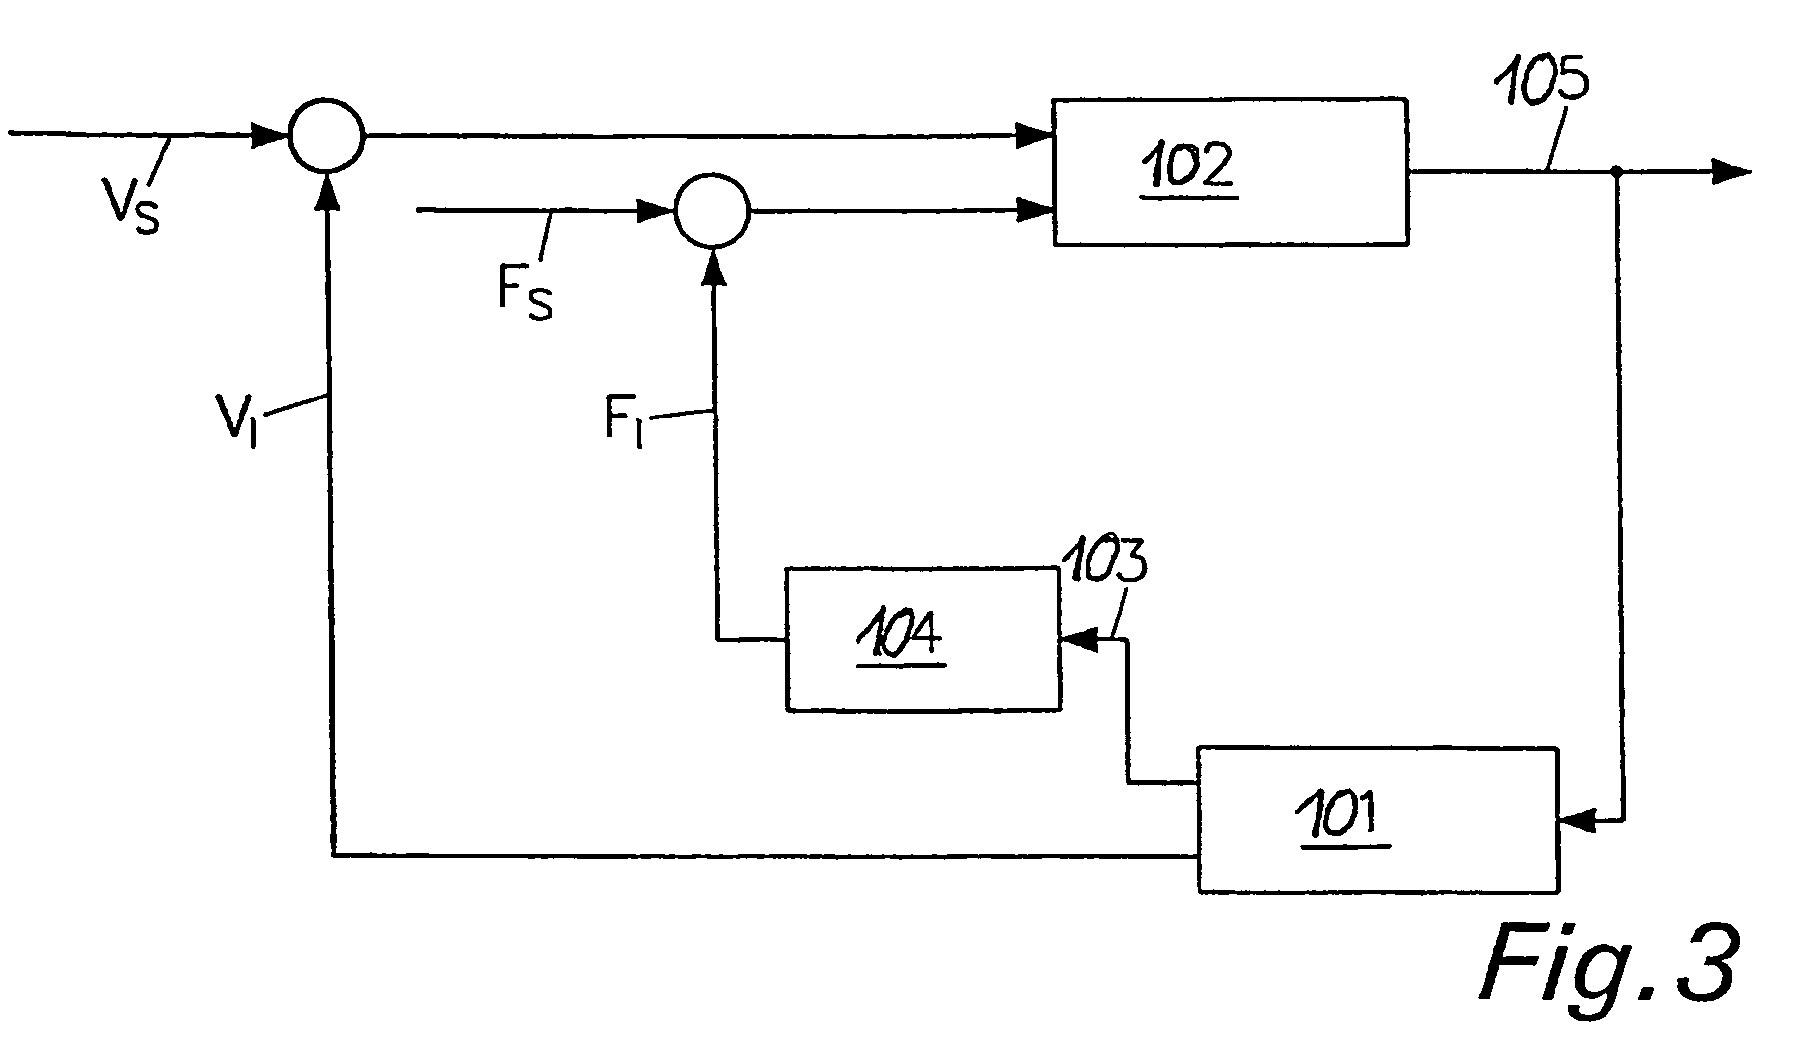 Method for controlling the air system in an internal combustion engine